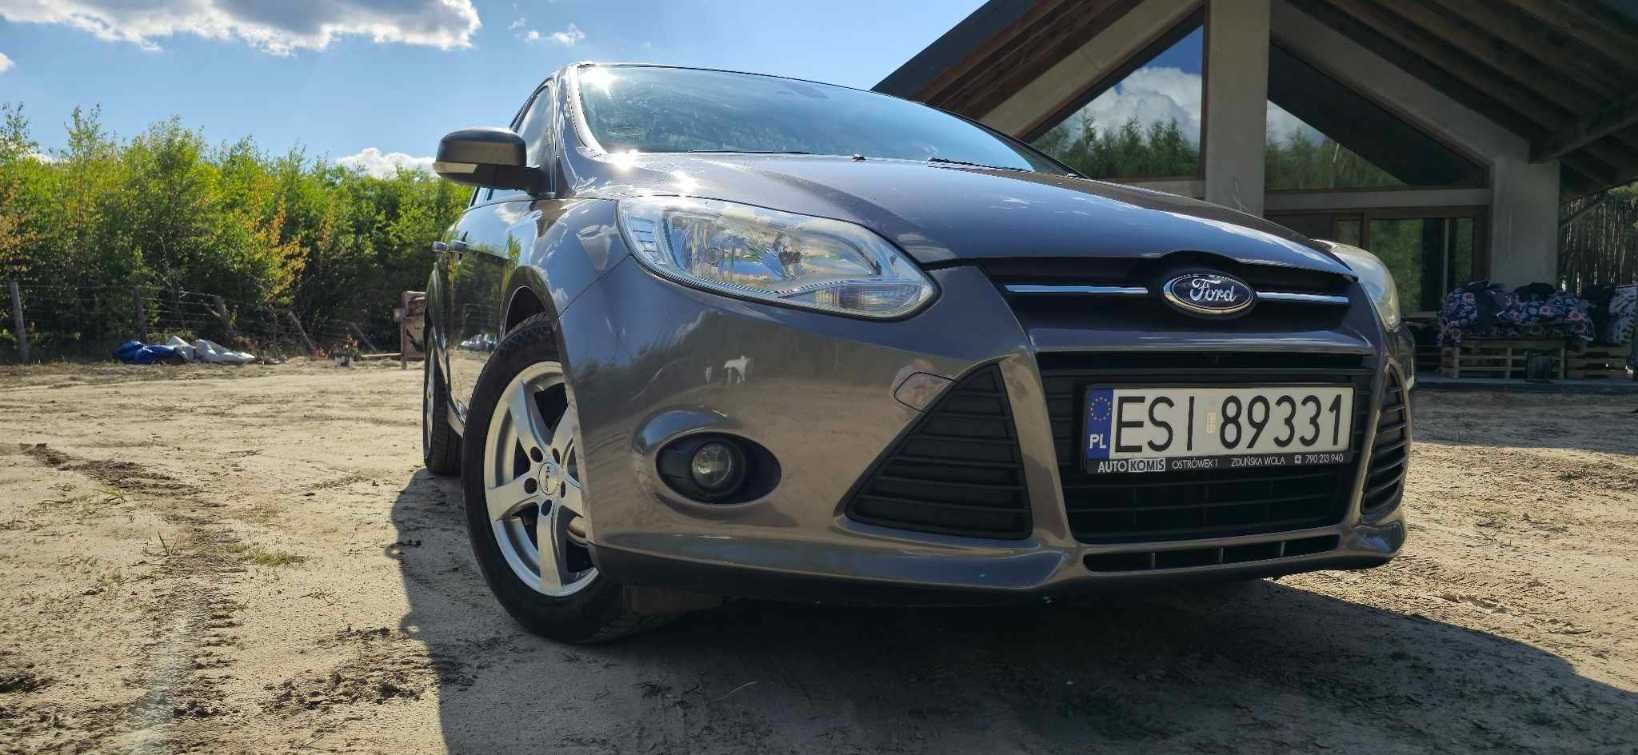 Ford Focus mk3 1.6 benzyna 125 km